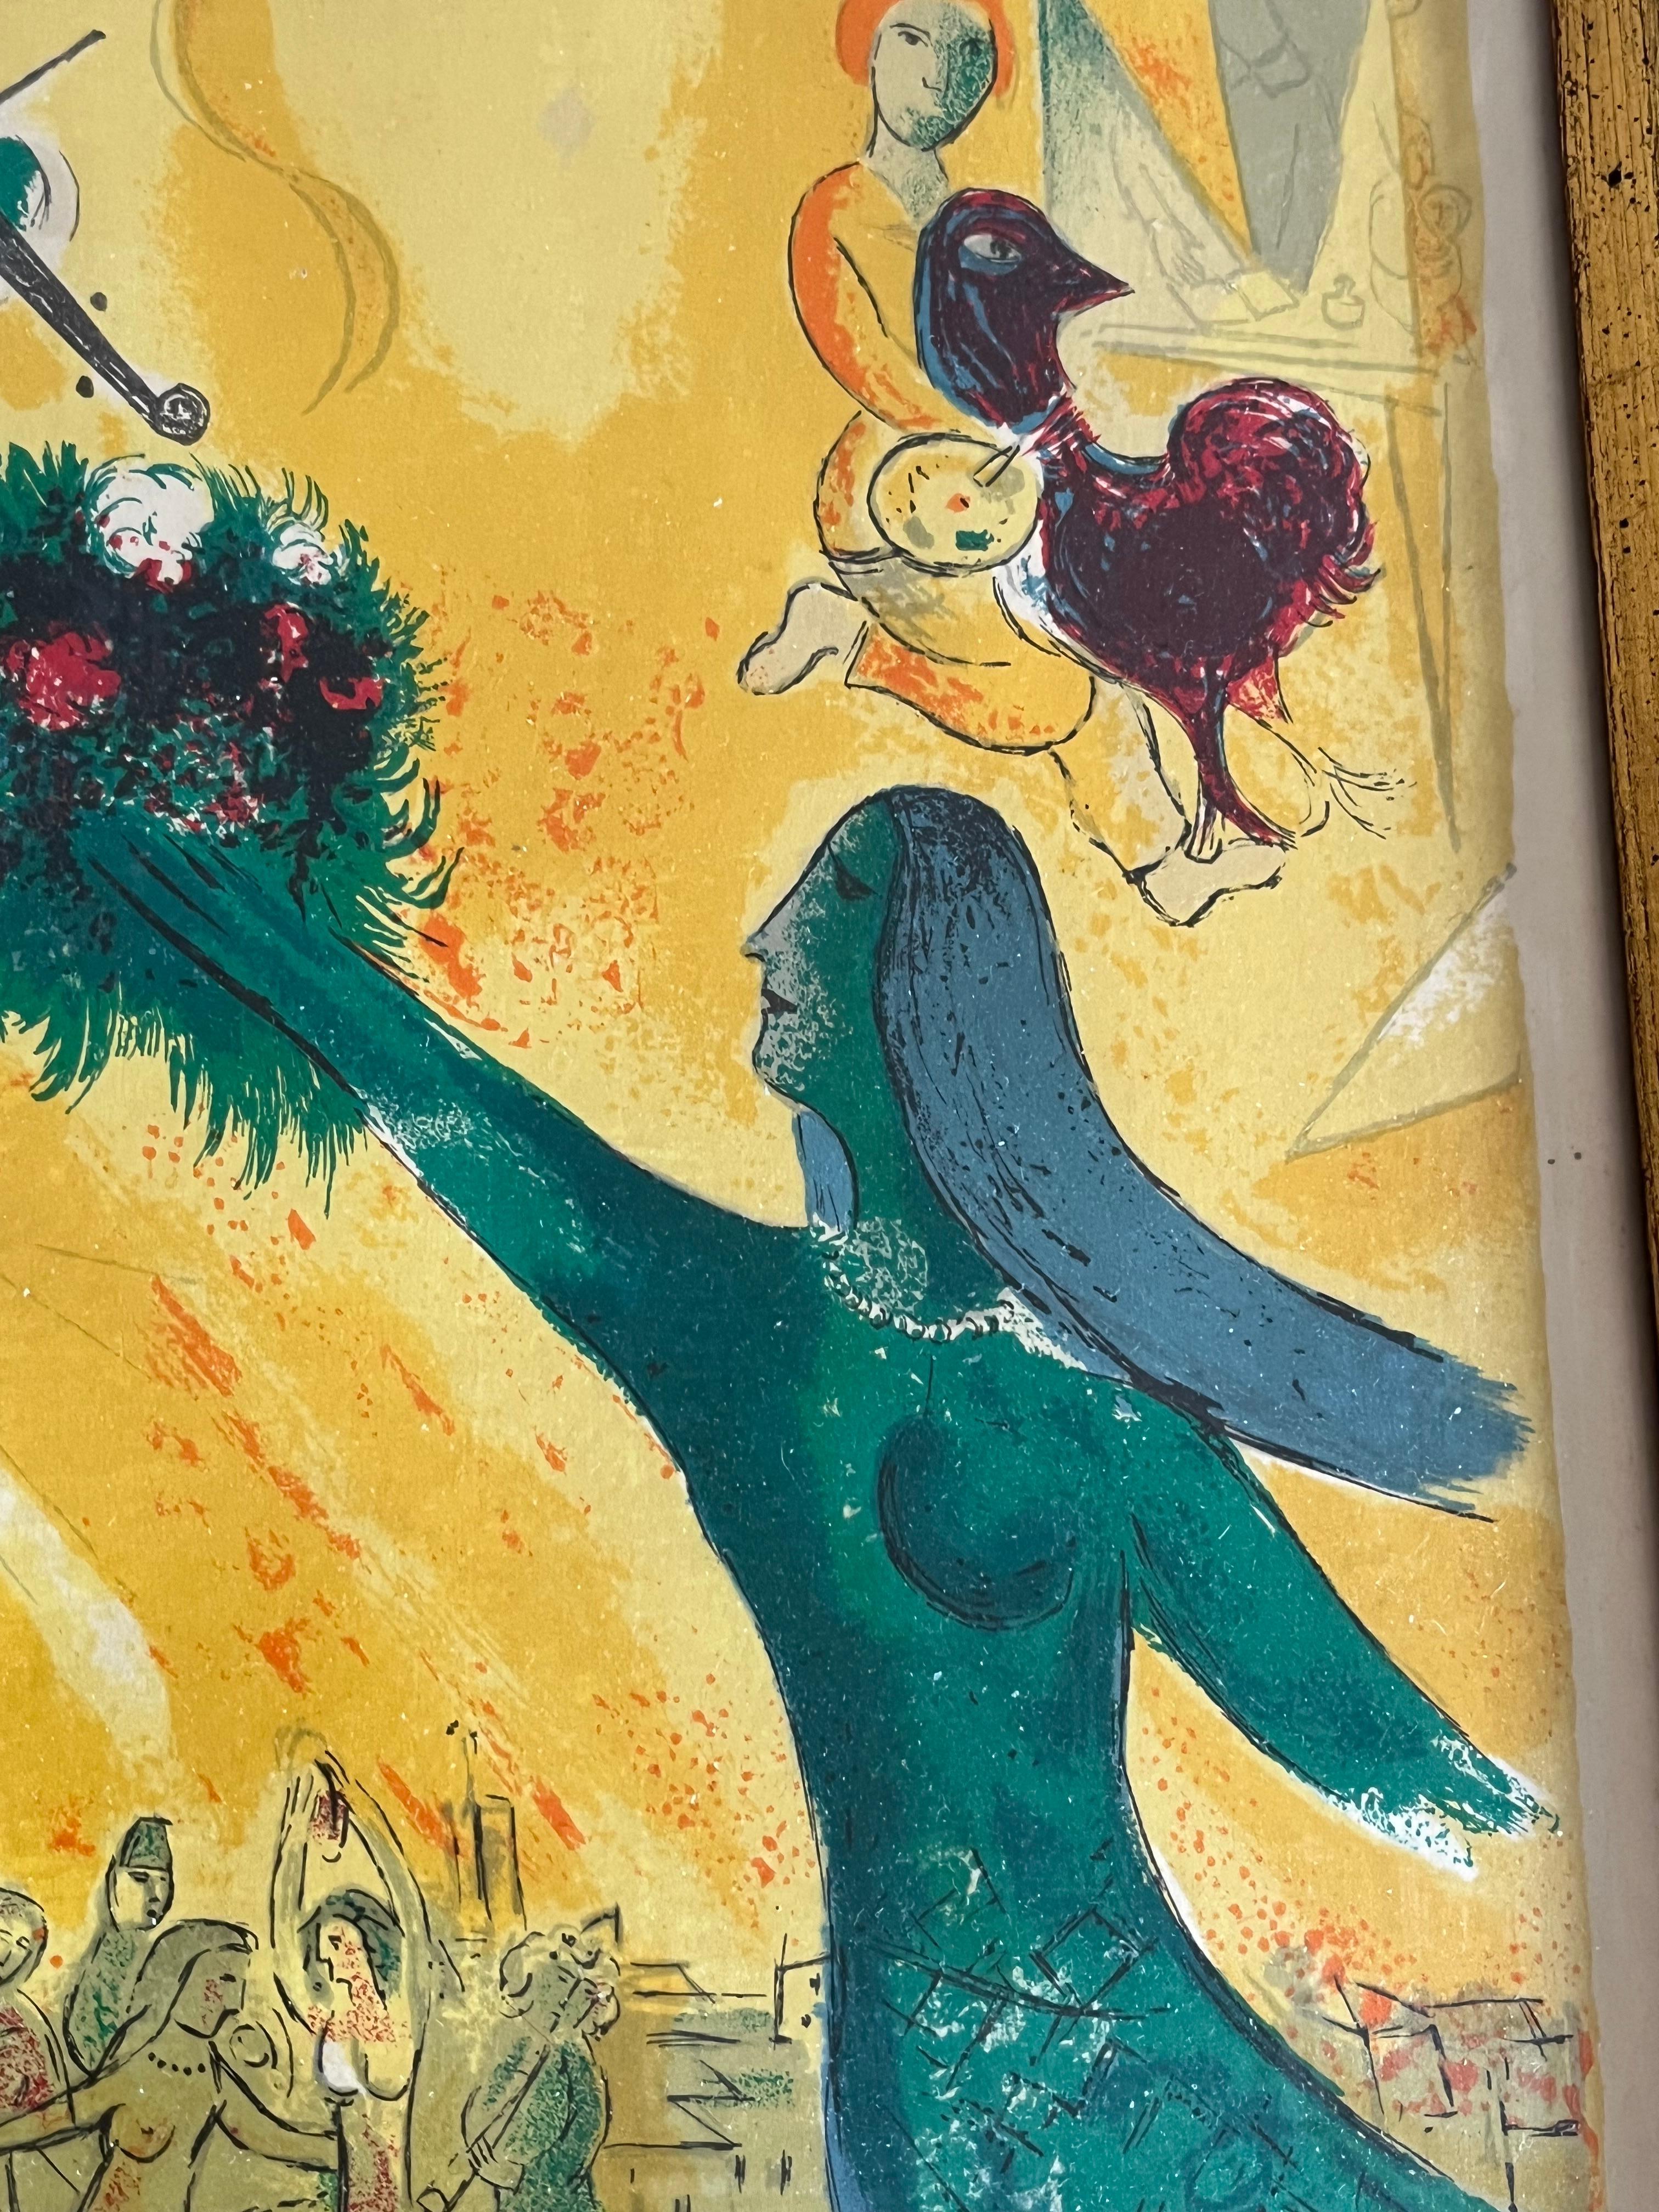 French Marc Chagall “The Dance” 1950 Litho For Sale